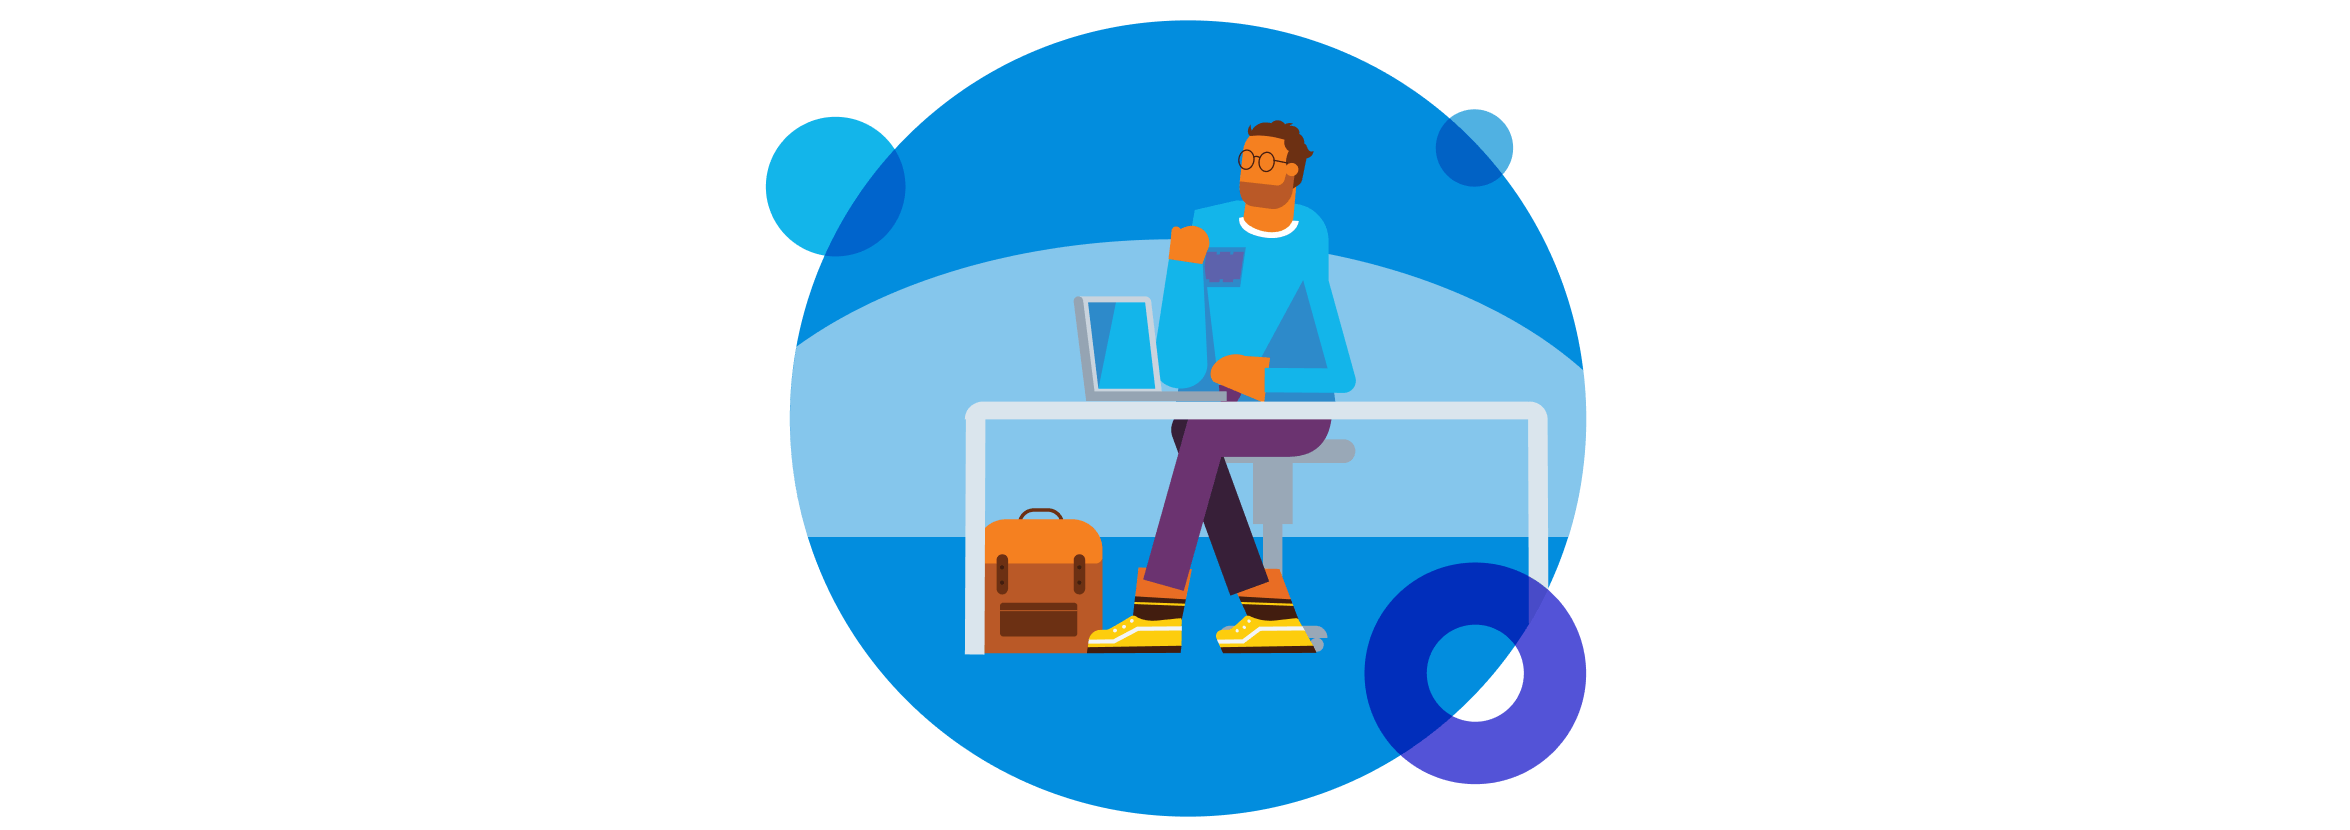 A graduate security analyst sits at their desk with an open laptop familiarising themself with Xero’s security framework.  